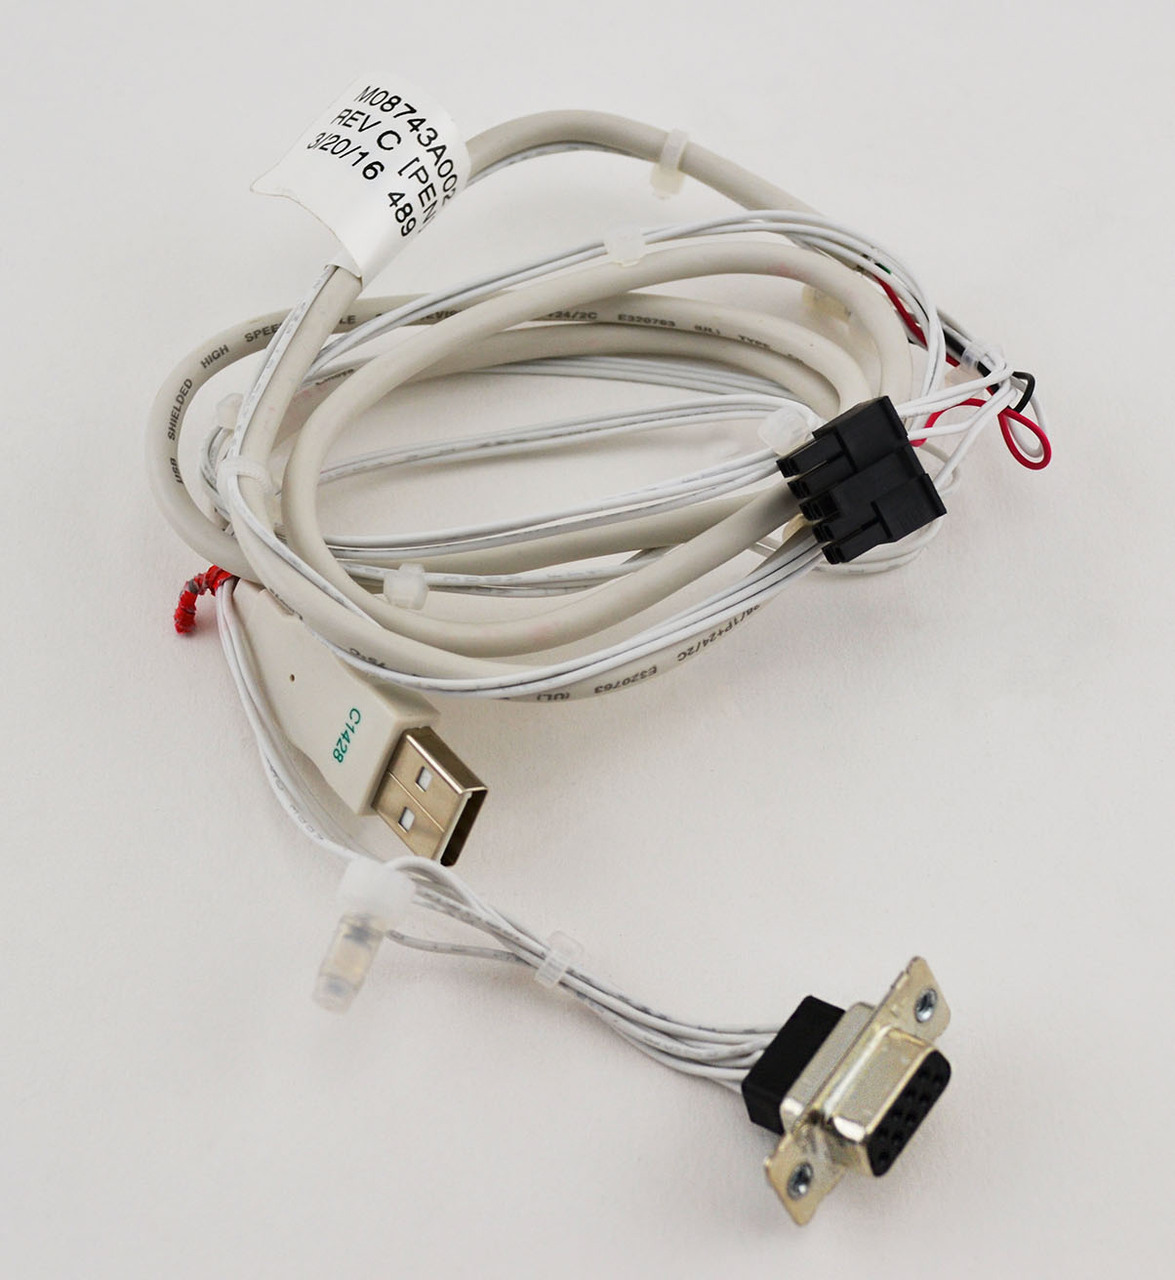 EPP PROGRAMMING CABLE, Fits Gilbarco Image